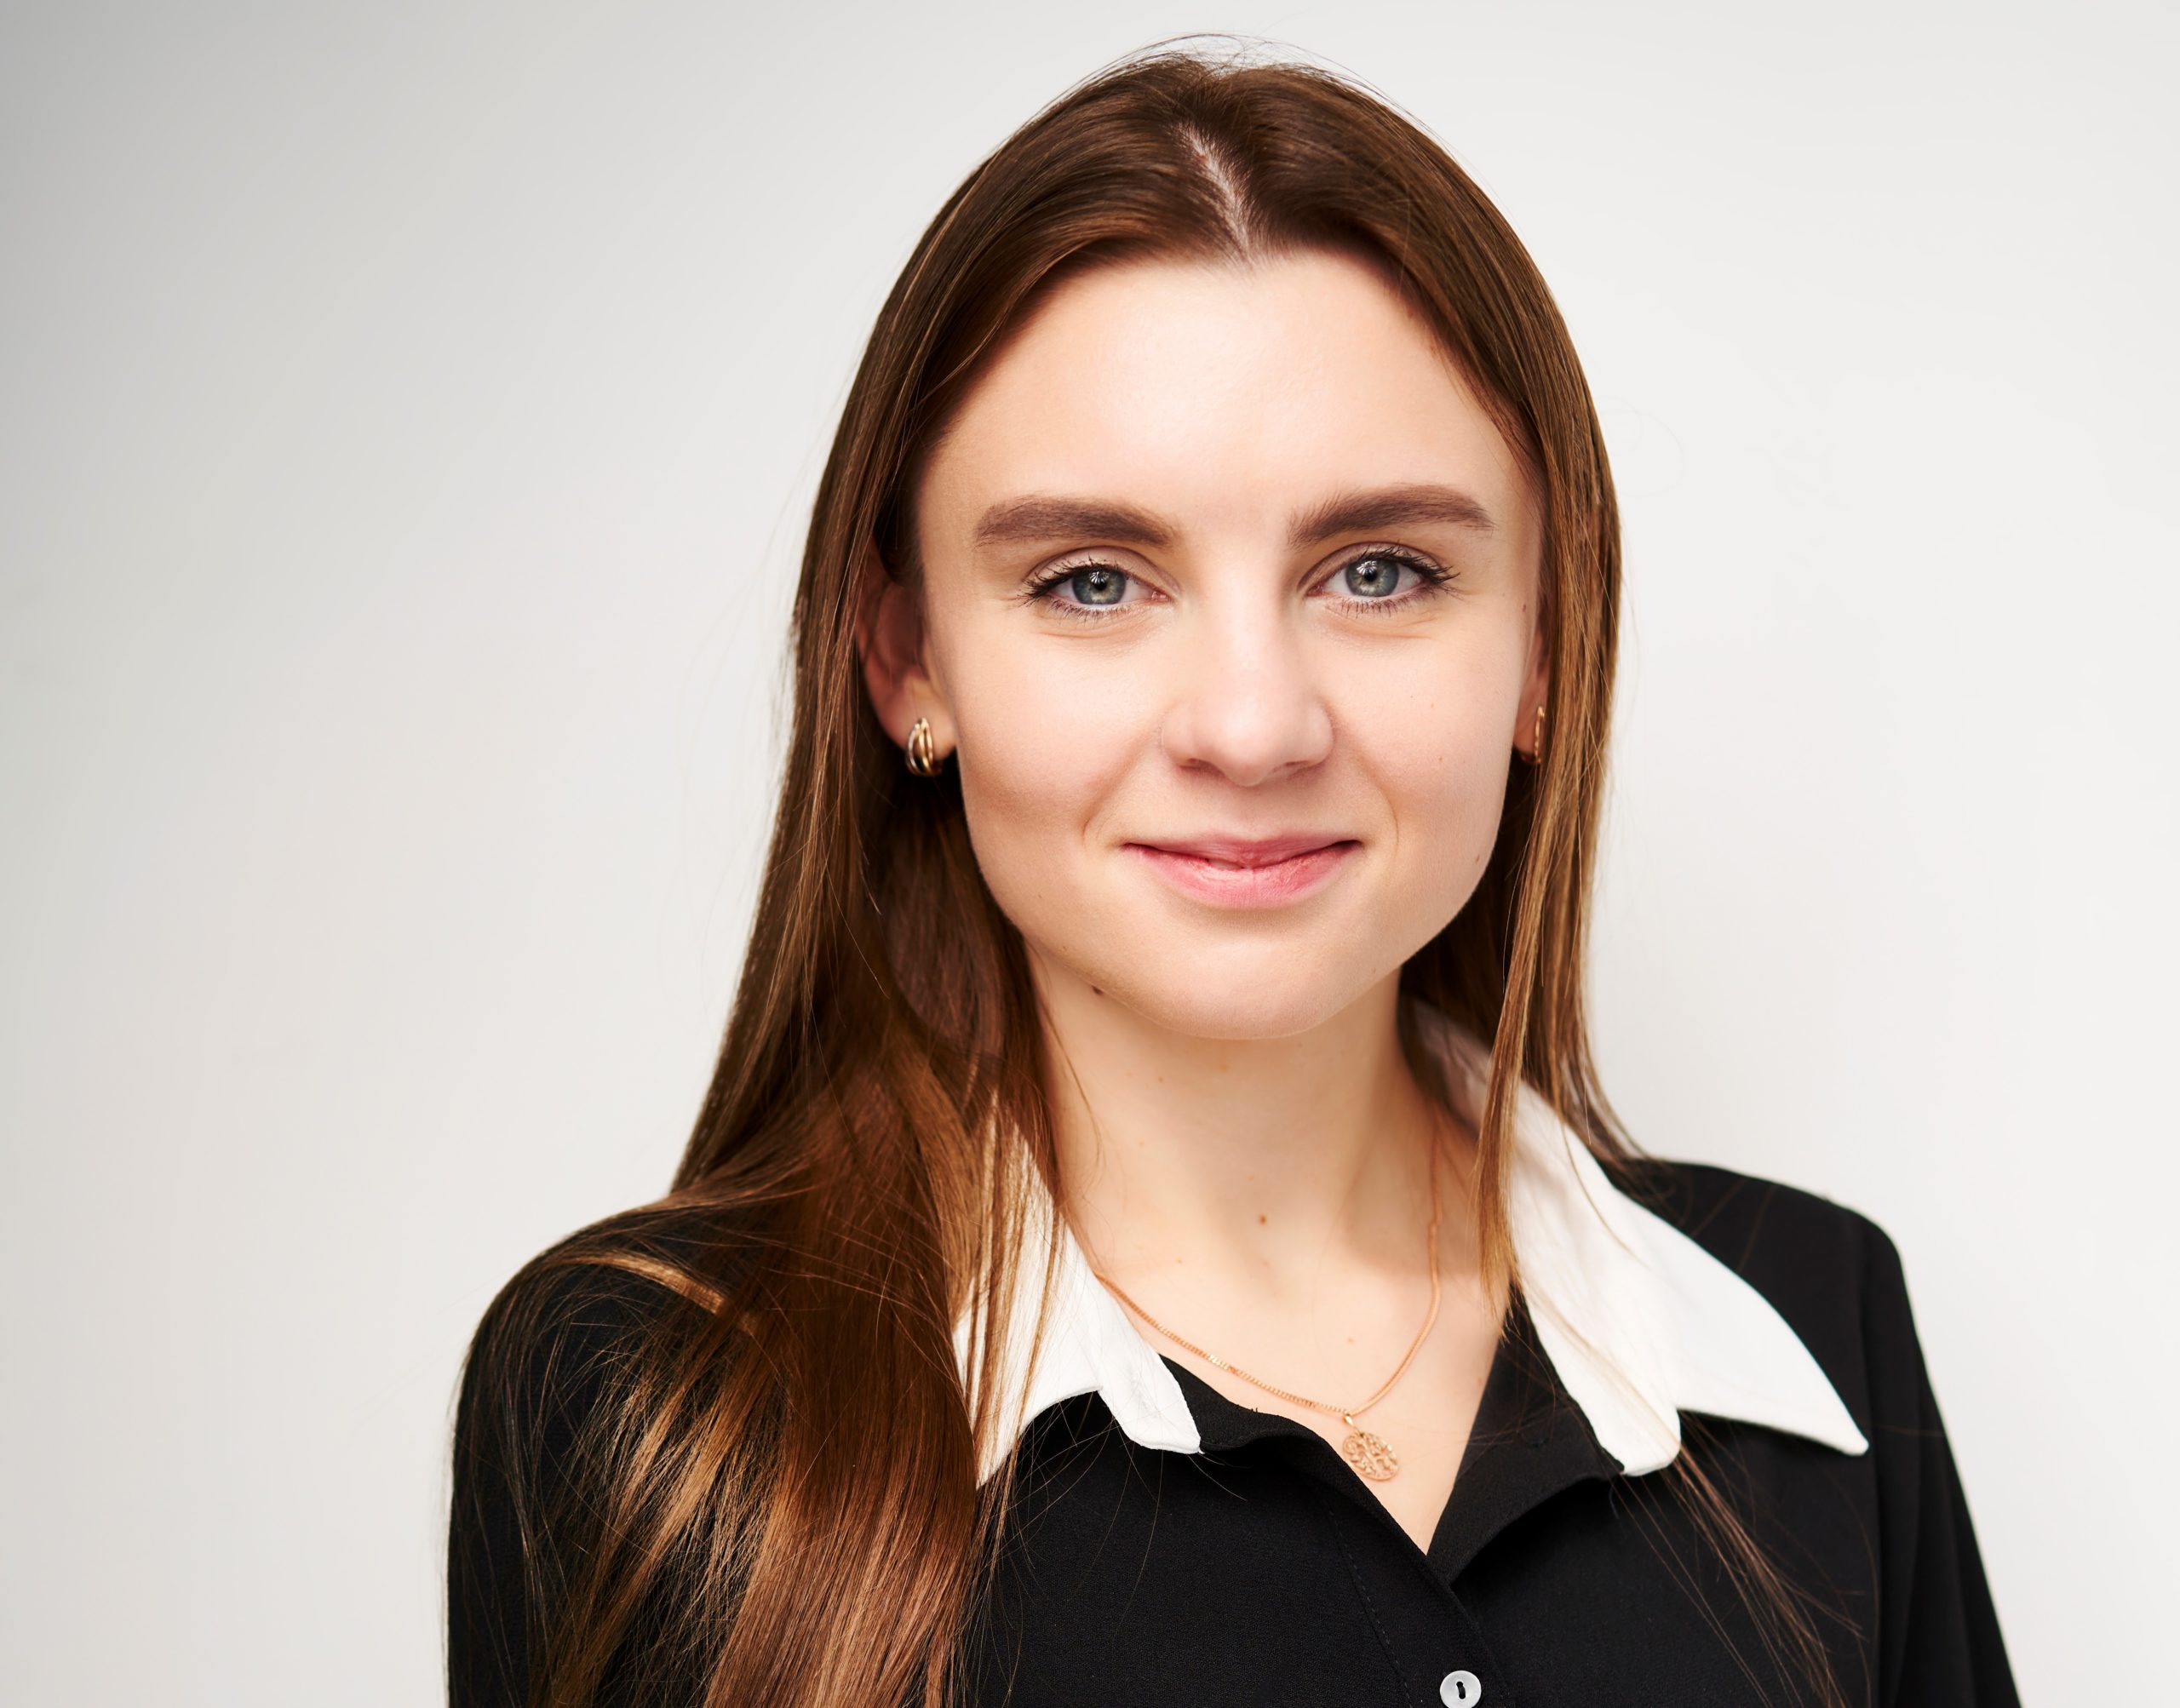 Anna-Maria Vynnytska: Inspired by new challenges and the opportunity to make decisions on my own